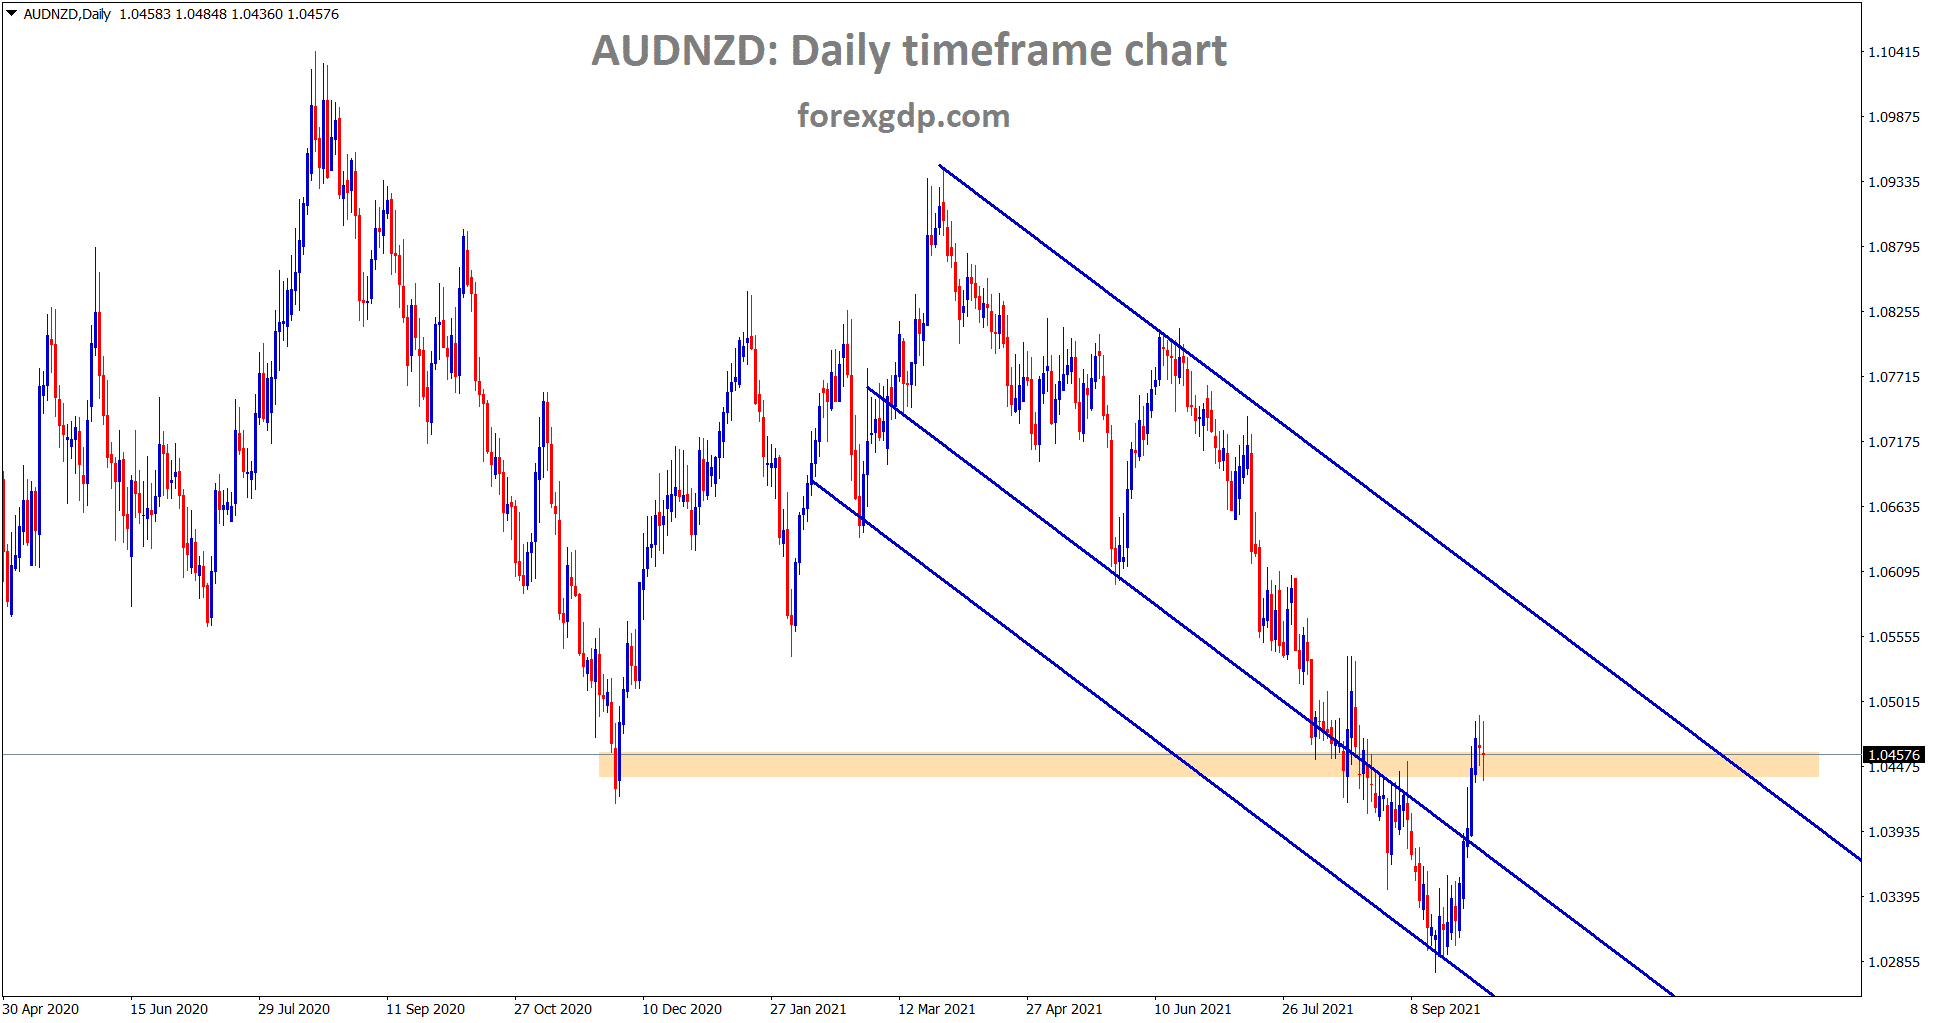 AUDNZD is moving up continuously now standing at the previous support level however market has rebounded hardly from the major support level 1.02